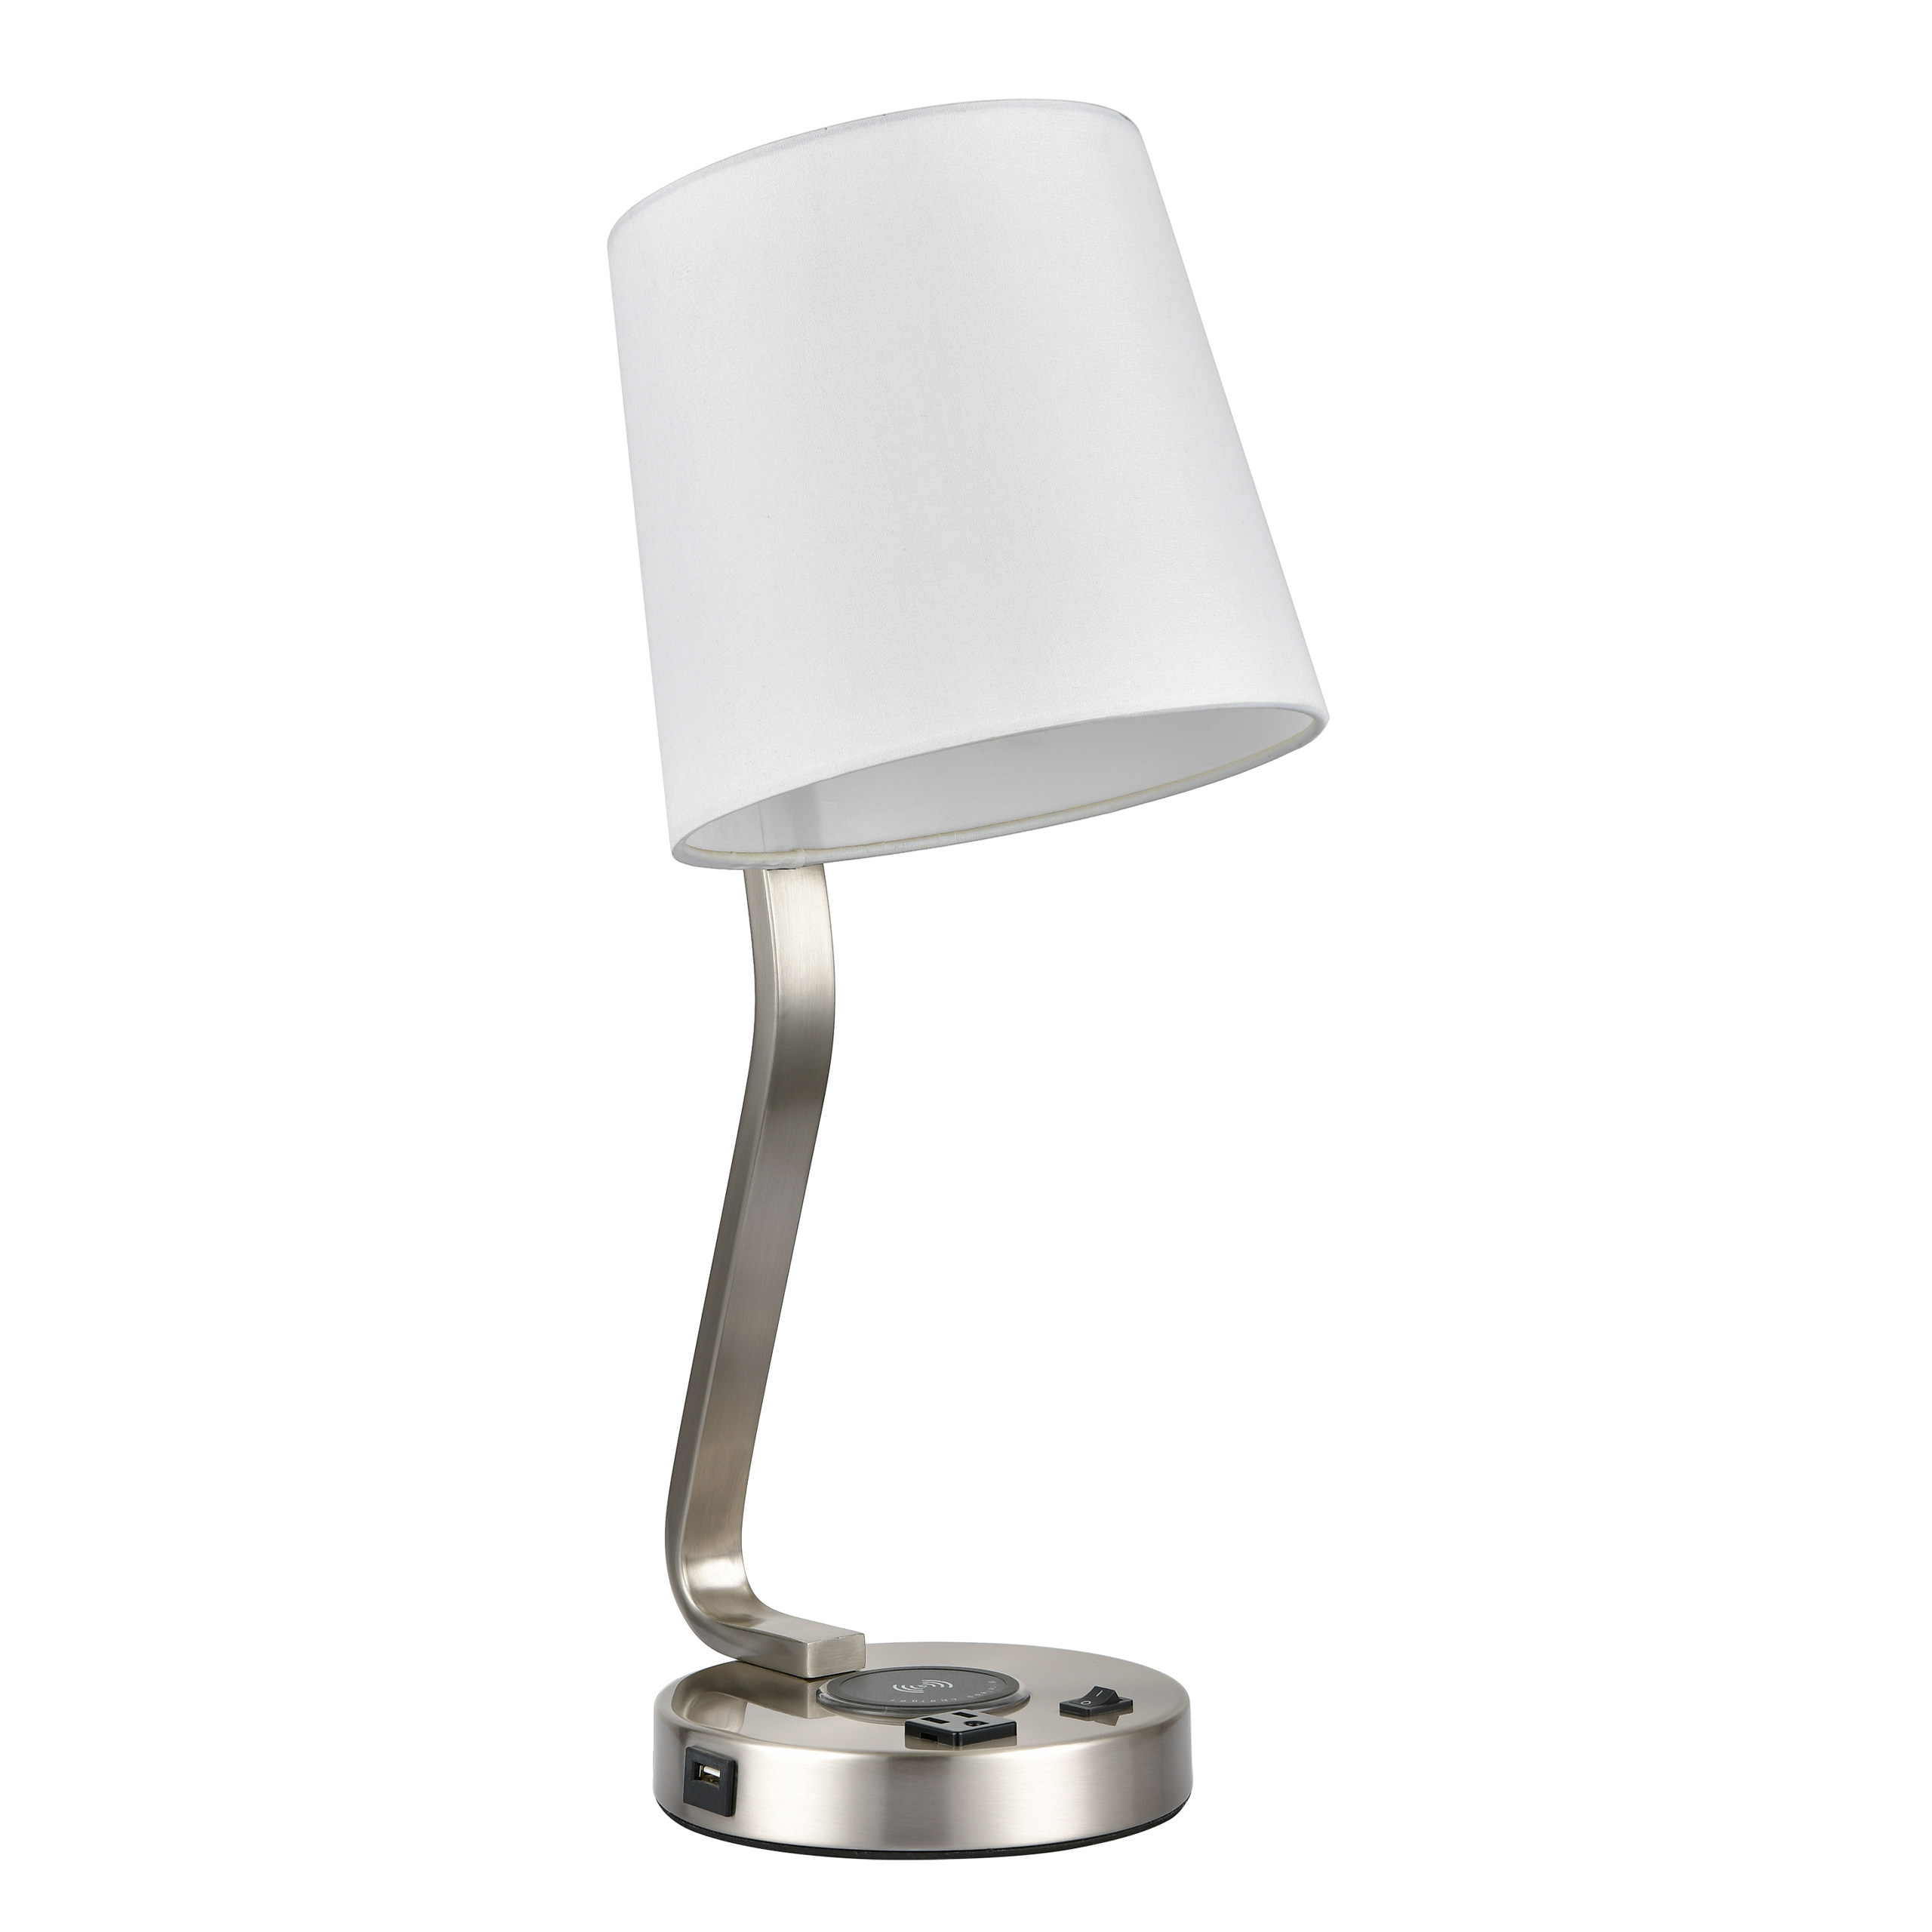 Brushed Nickel Table Lamp with one Outlet 100W